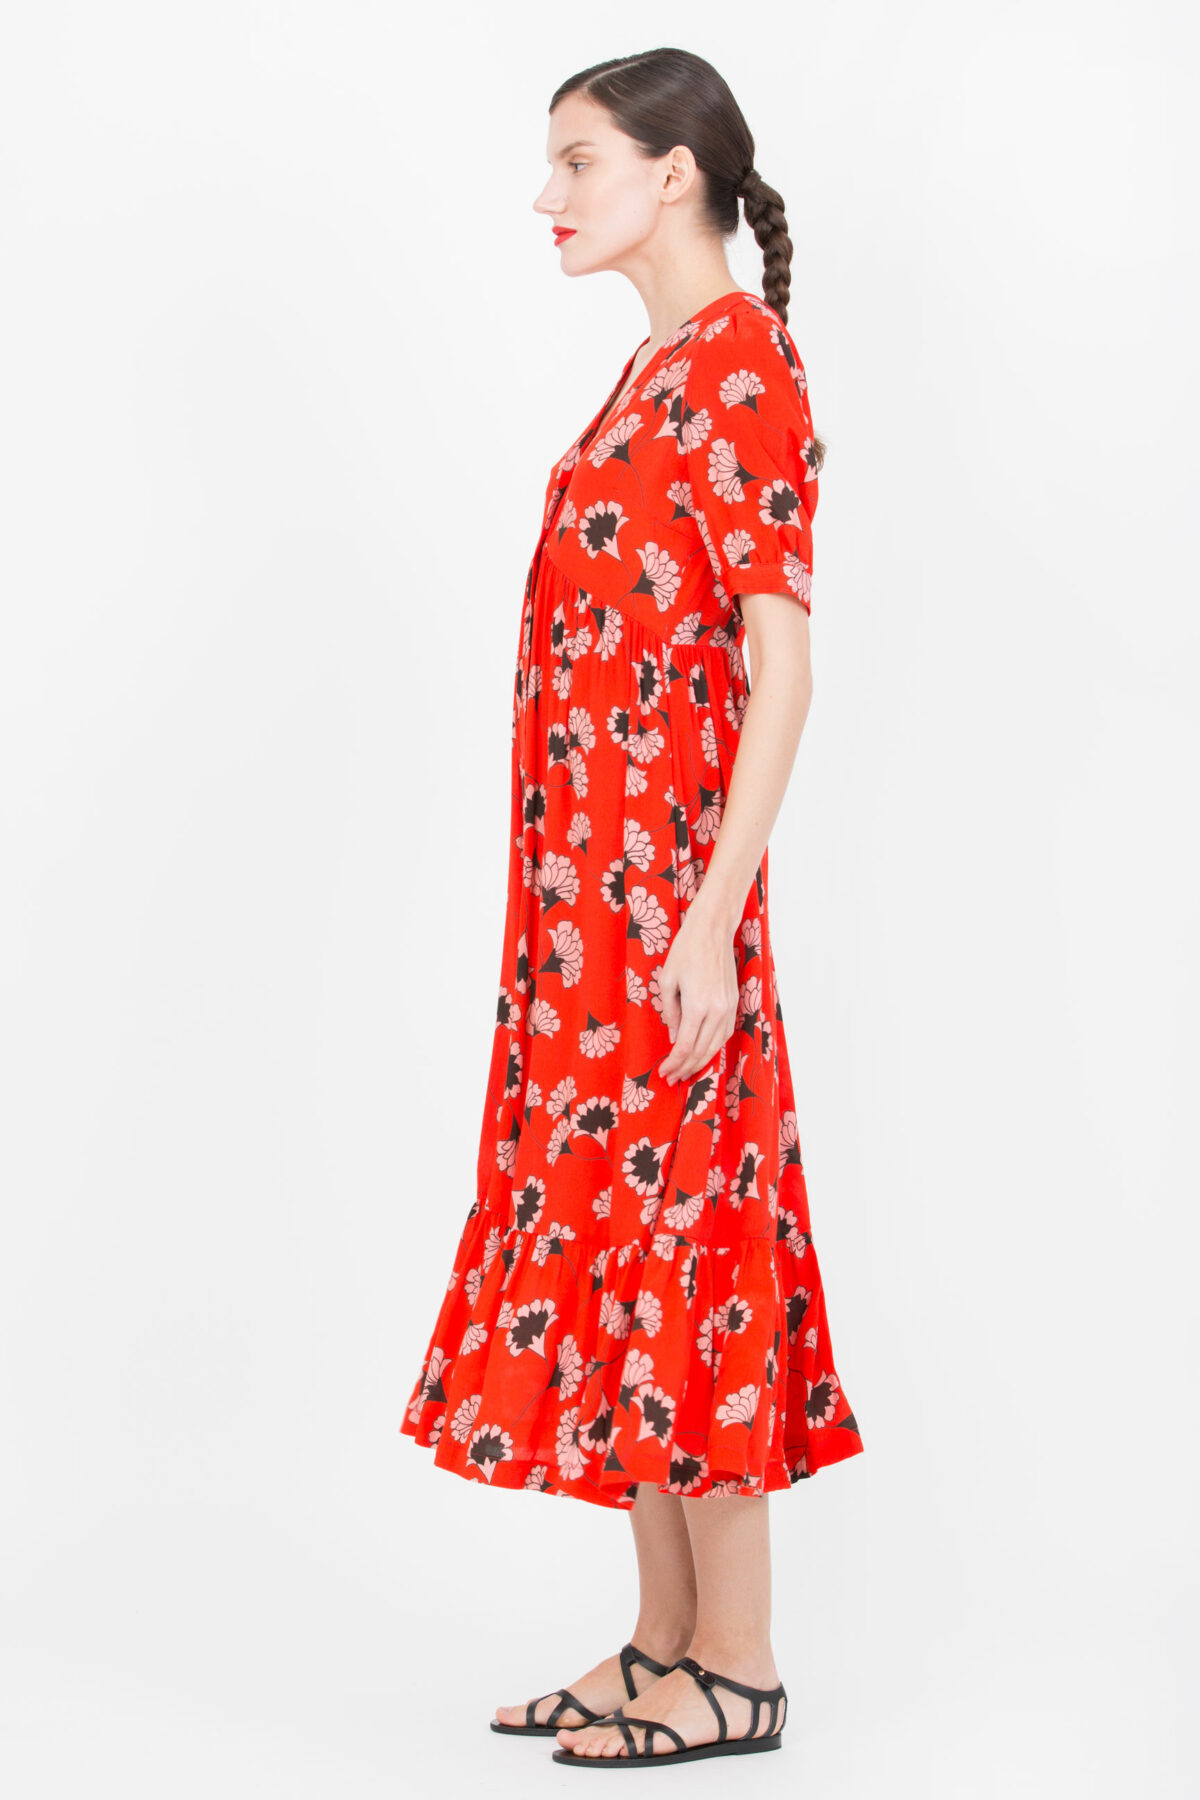 rebecca-printed-floral-red-dress-lapetitefrancaise-matchboxathens